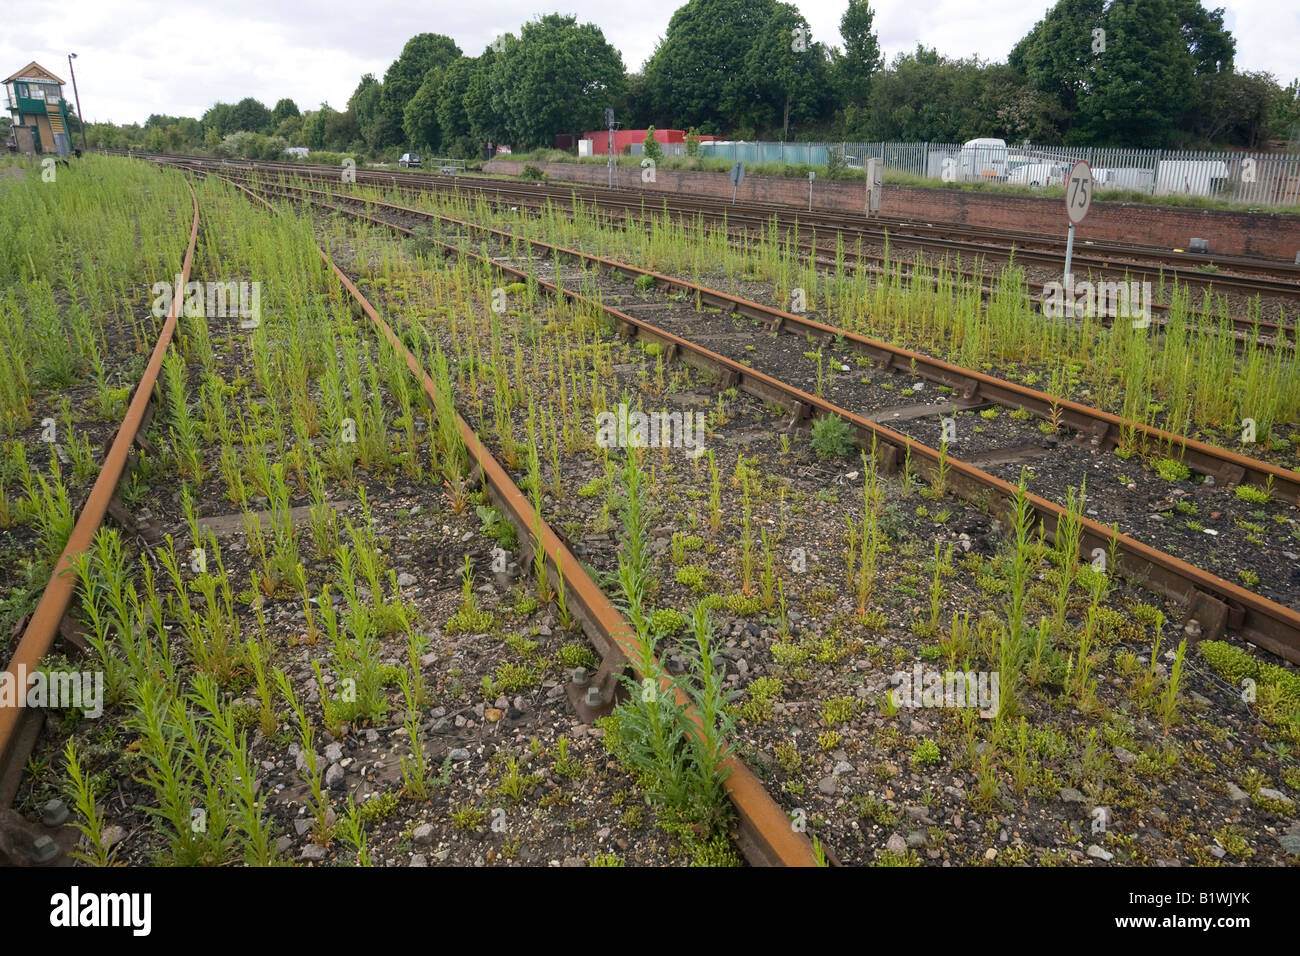 old rusted railway tracks with weeds growing Stock Photo